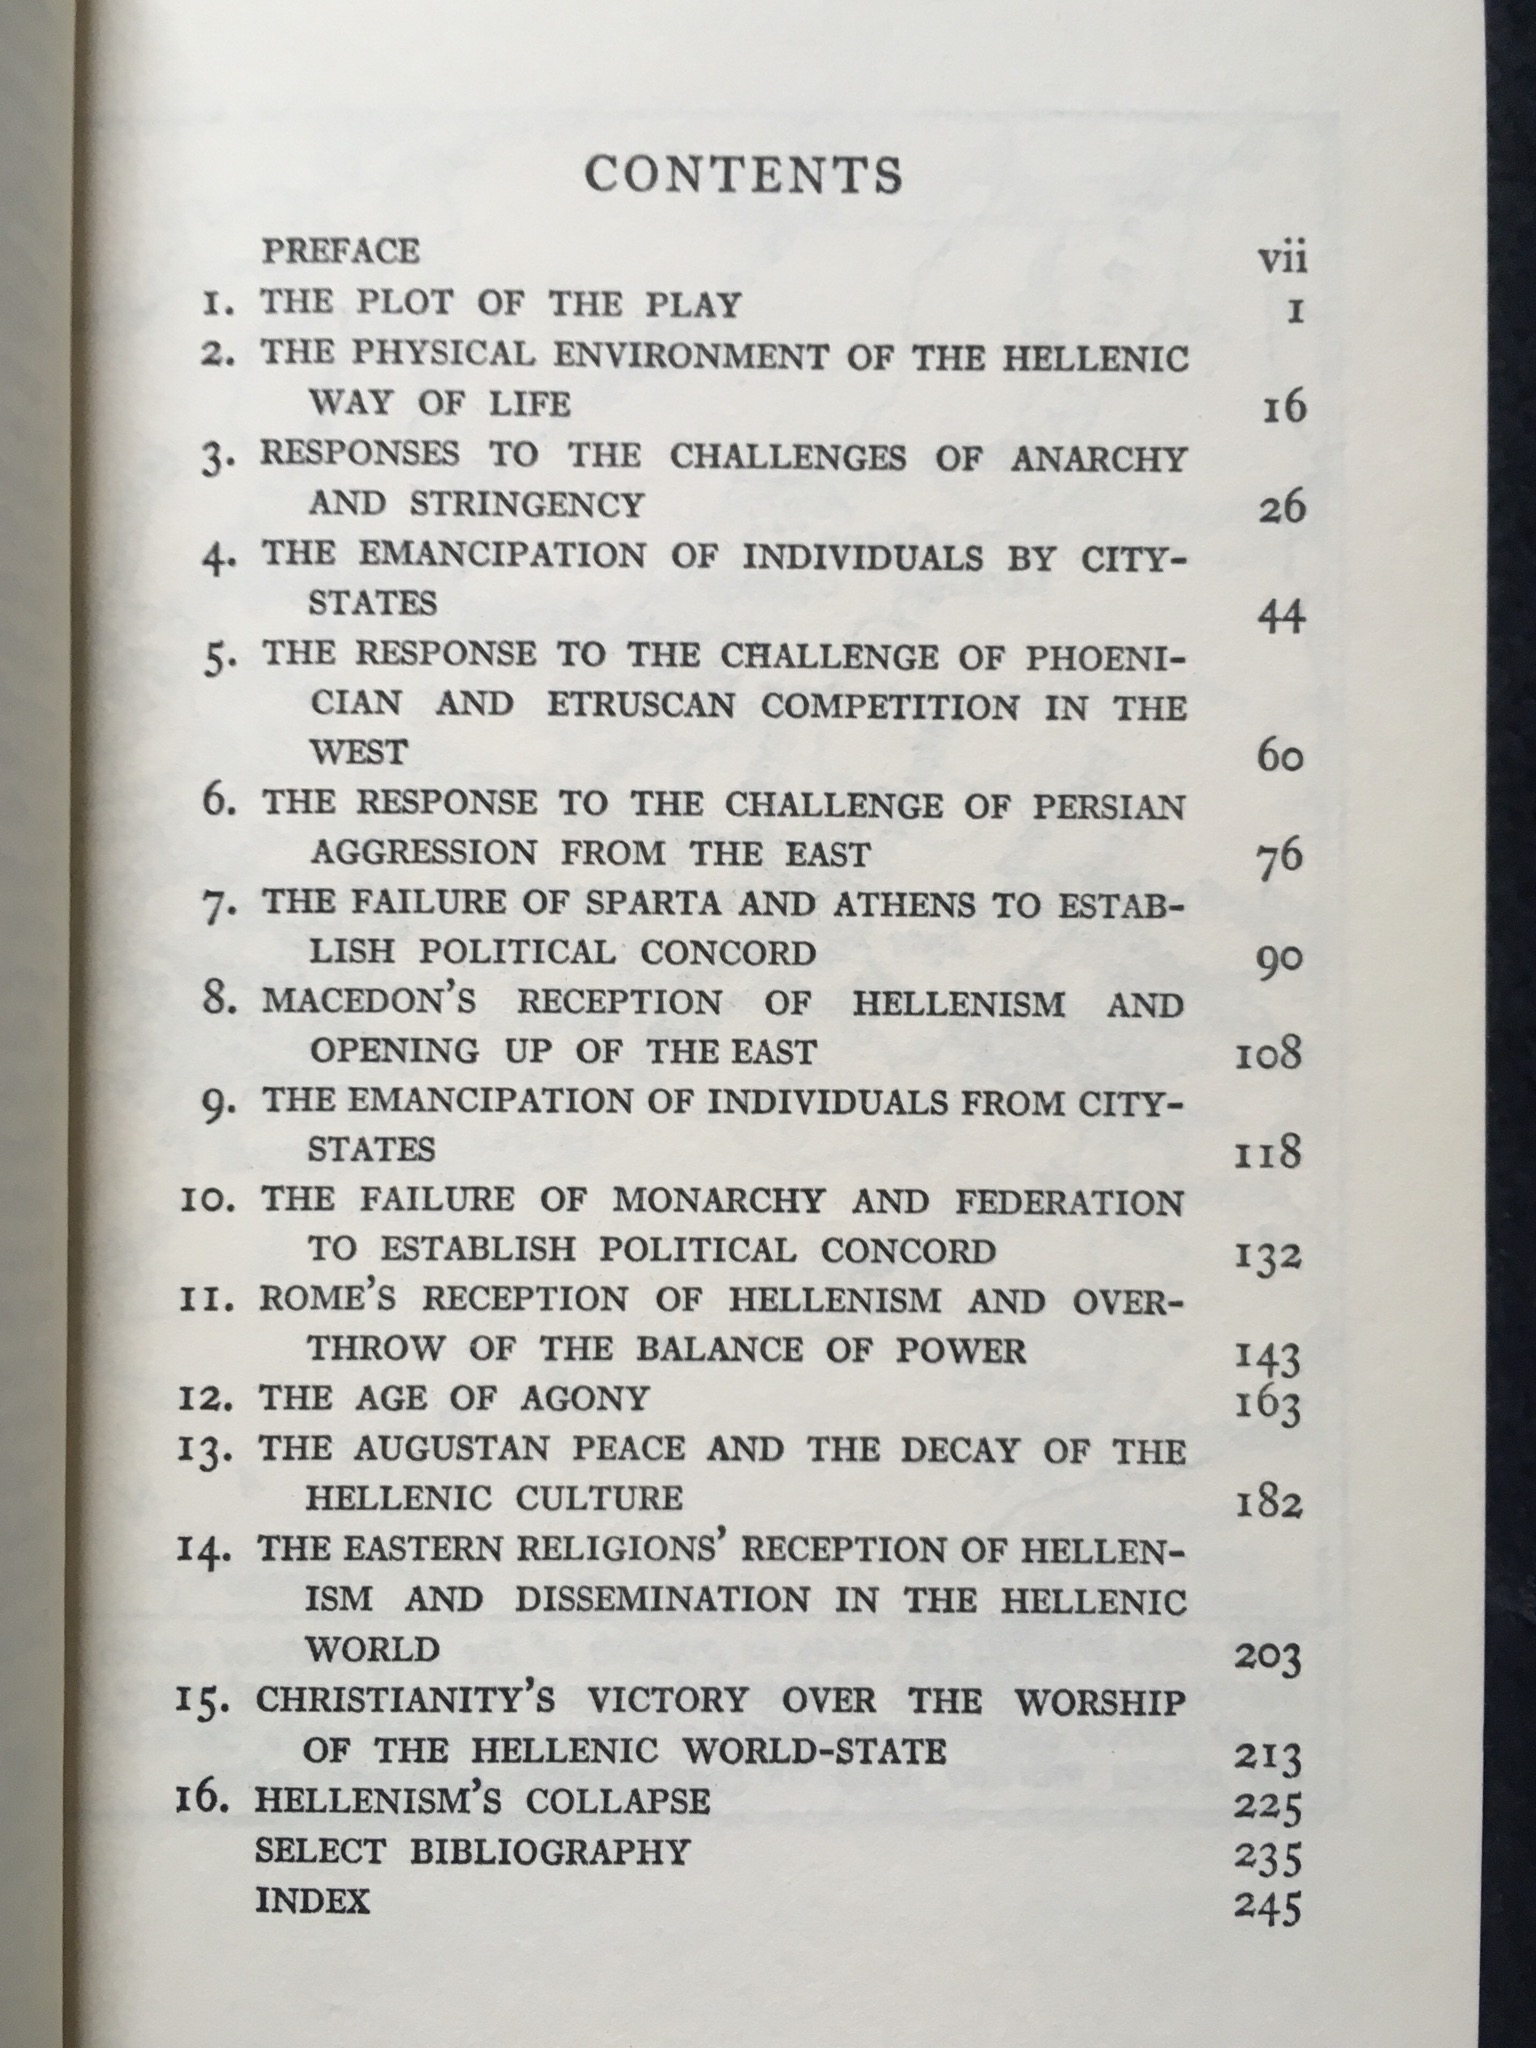 Hellenism The History of a Civilization by Arnold J. Toynbee